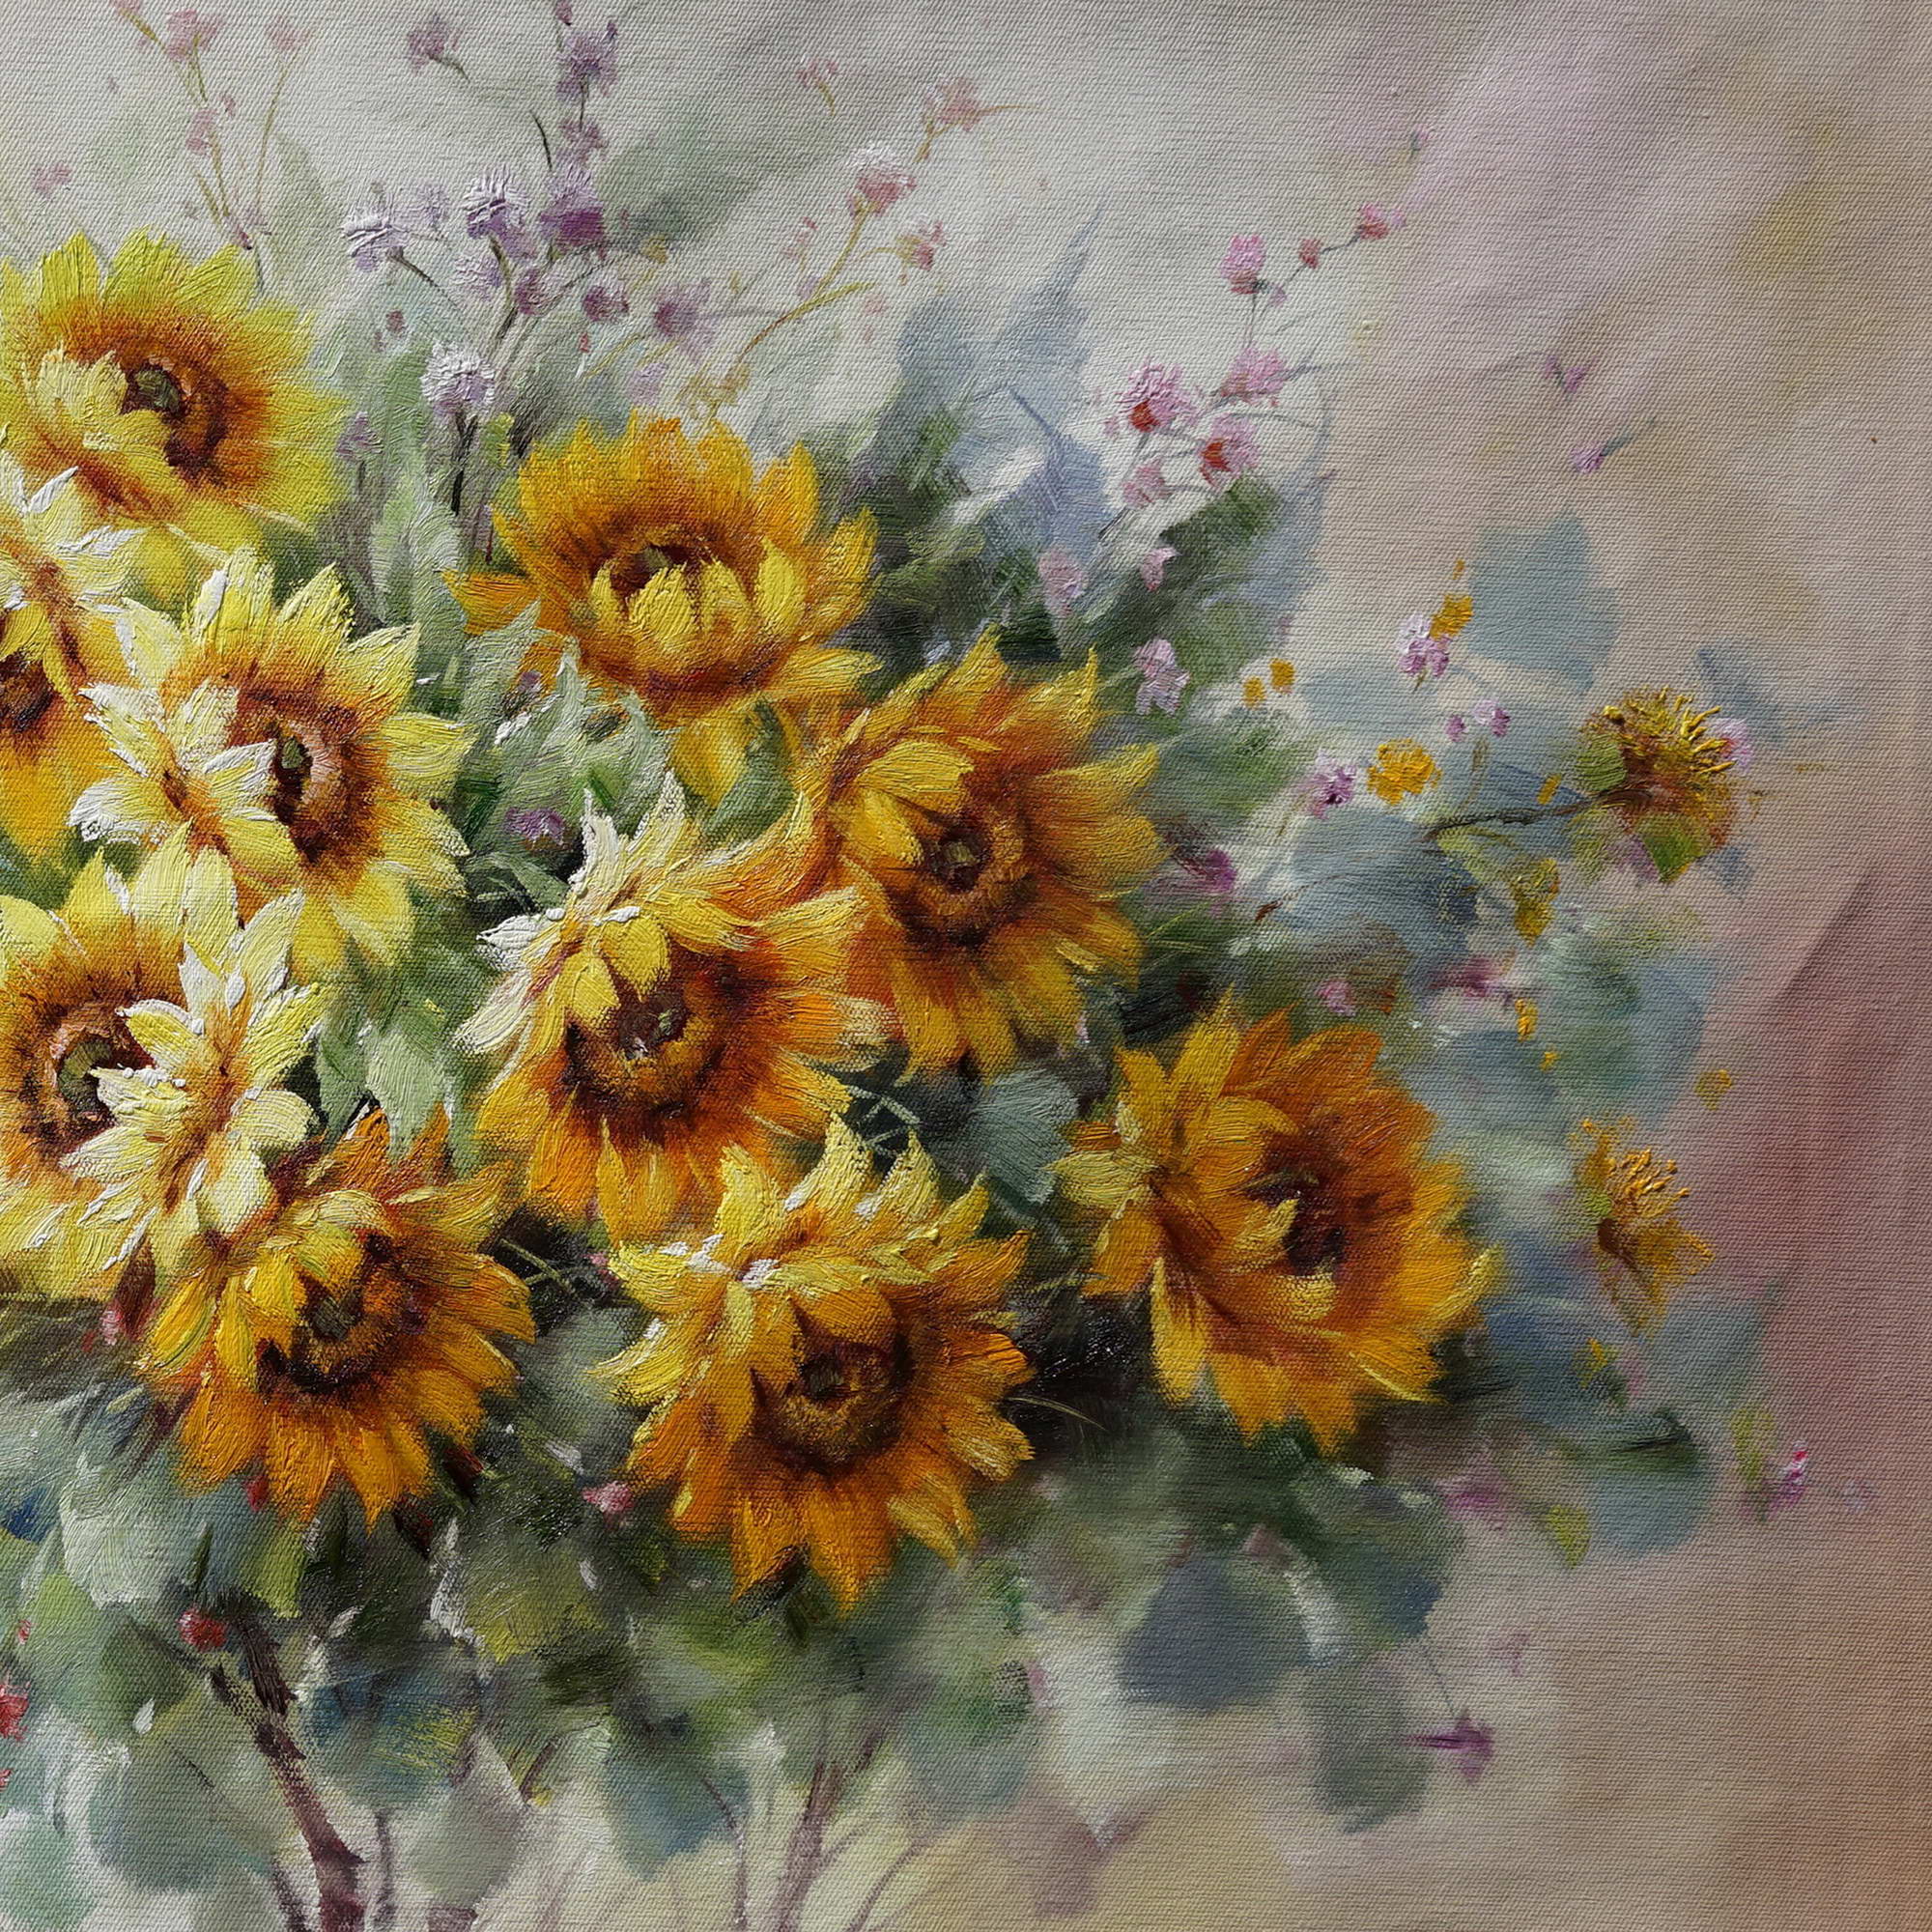 Hand painted Still Life with Sunflowers 75x150cm